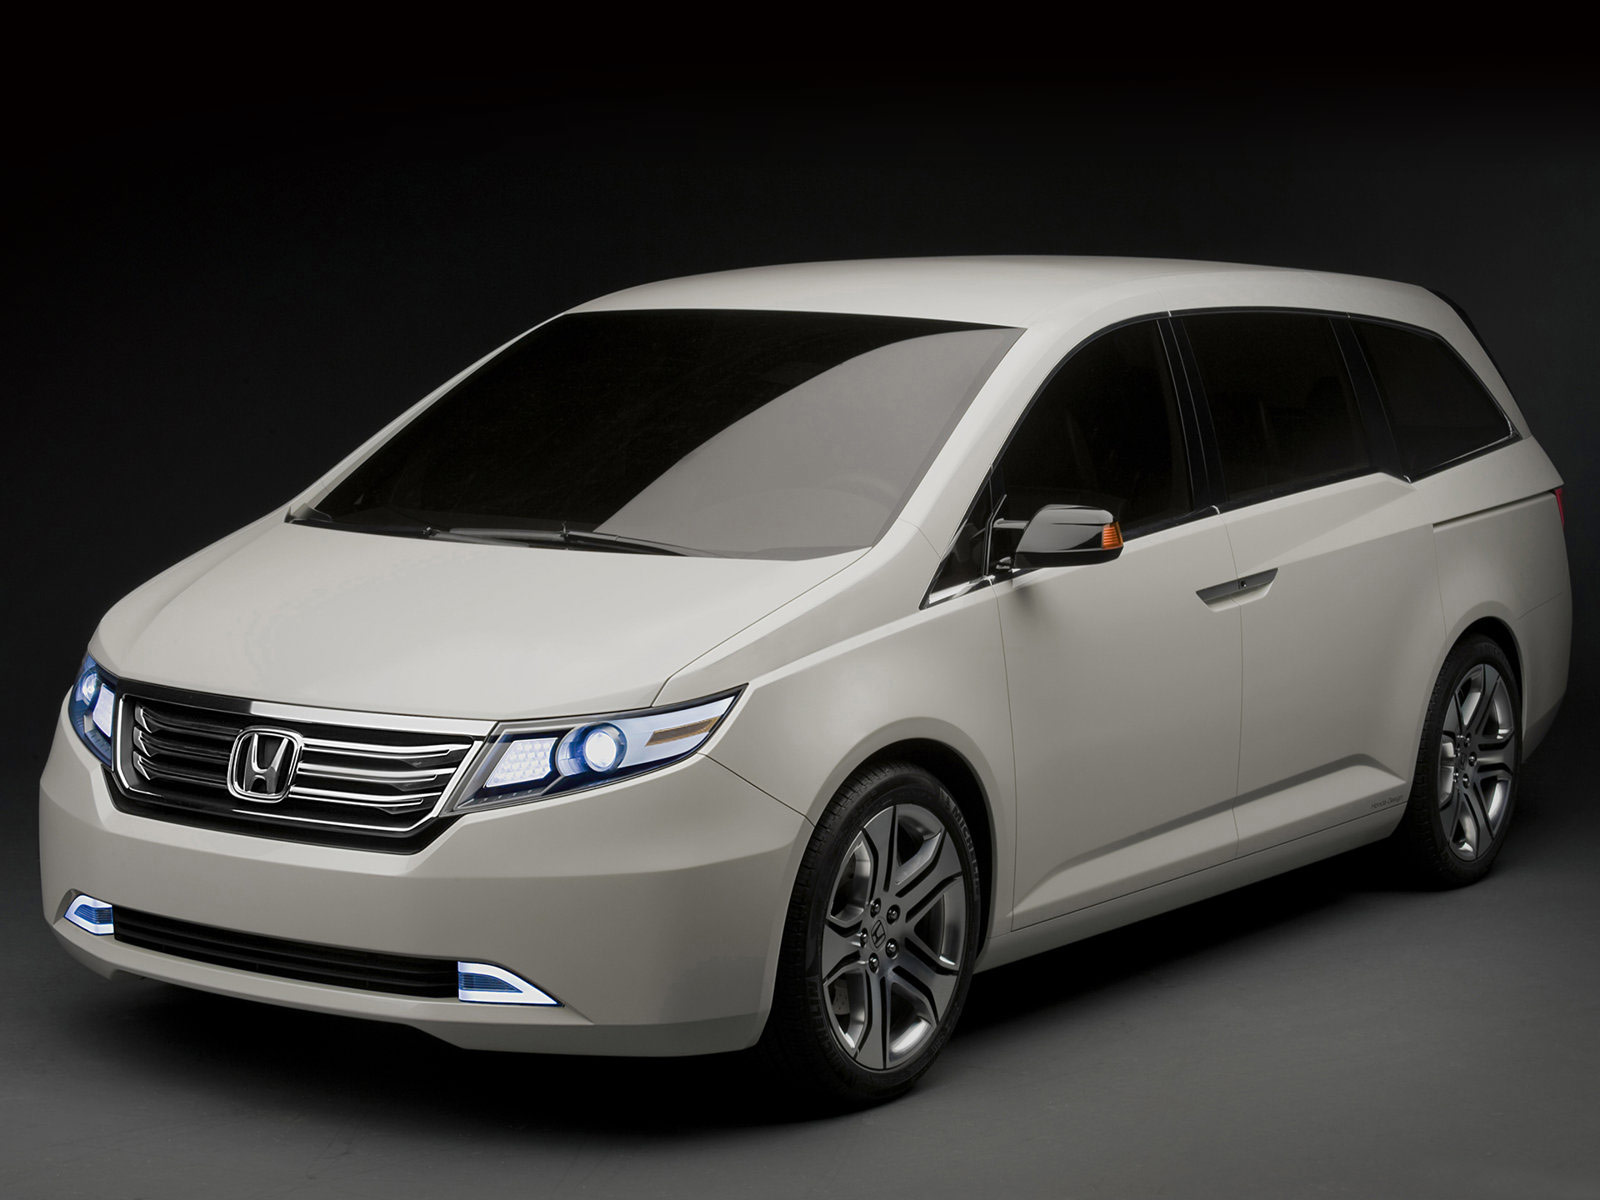 2012 Honda Odyssey - Review Spec Picture Release Date and Price